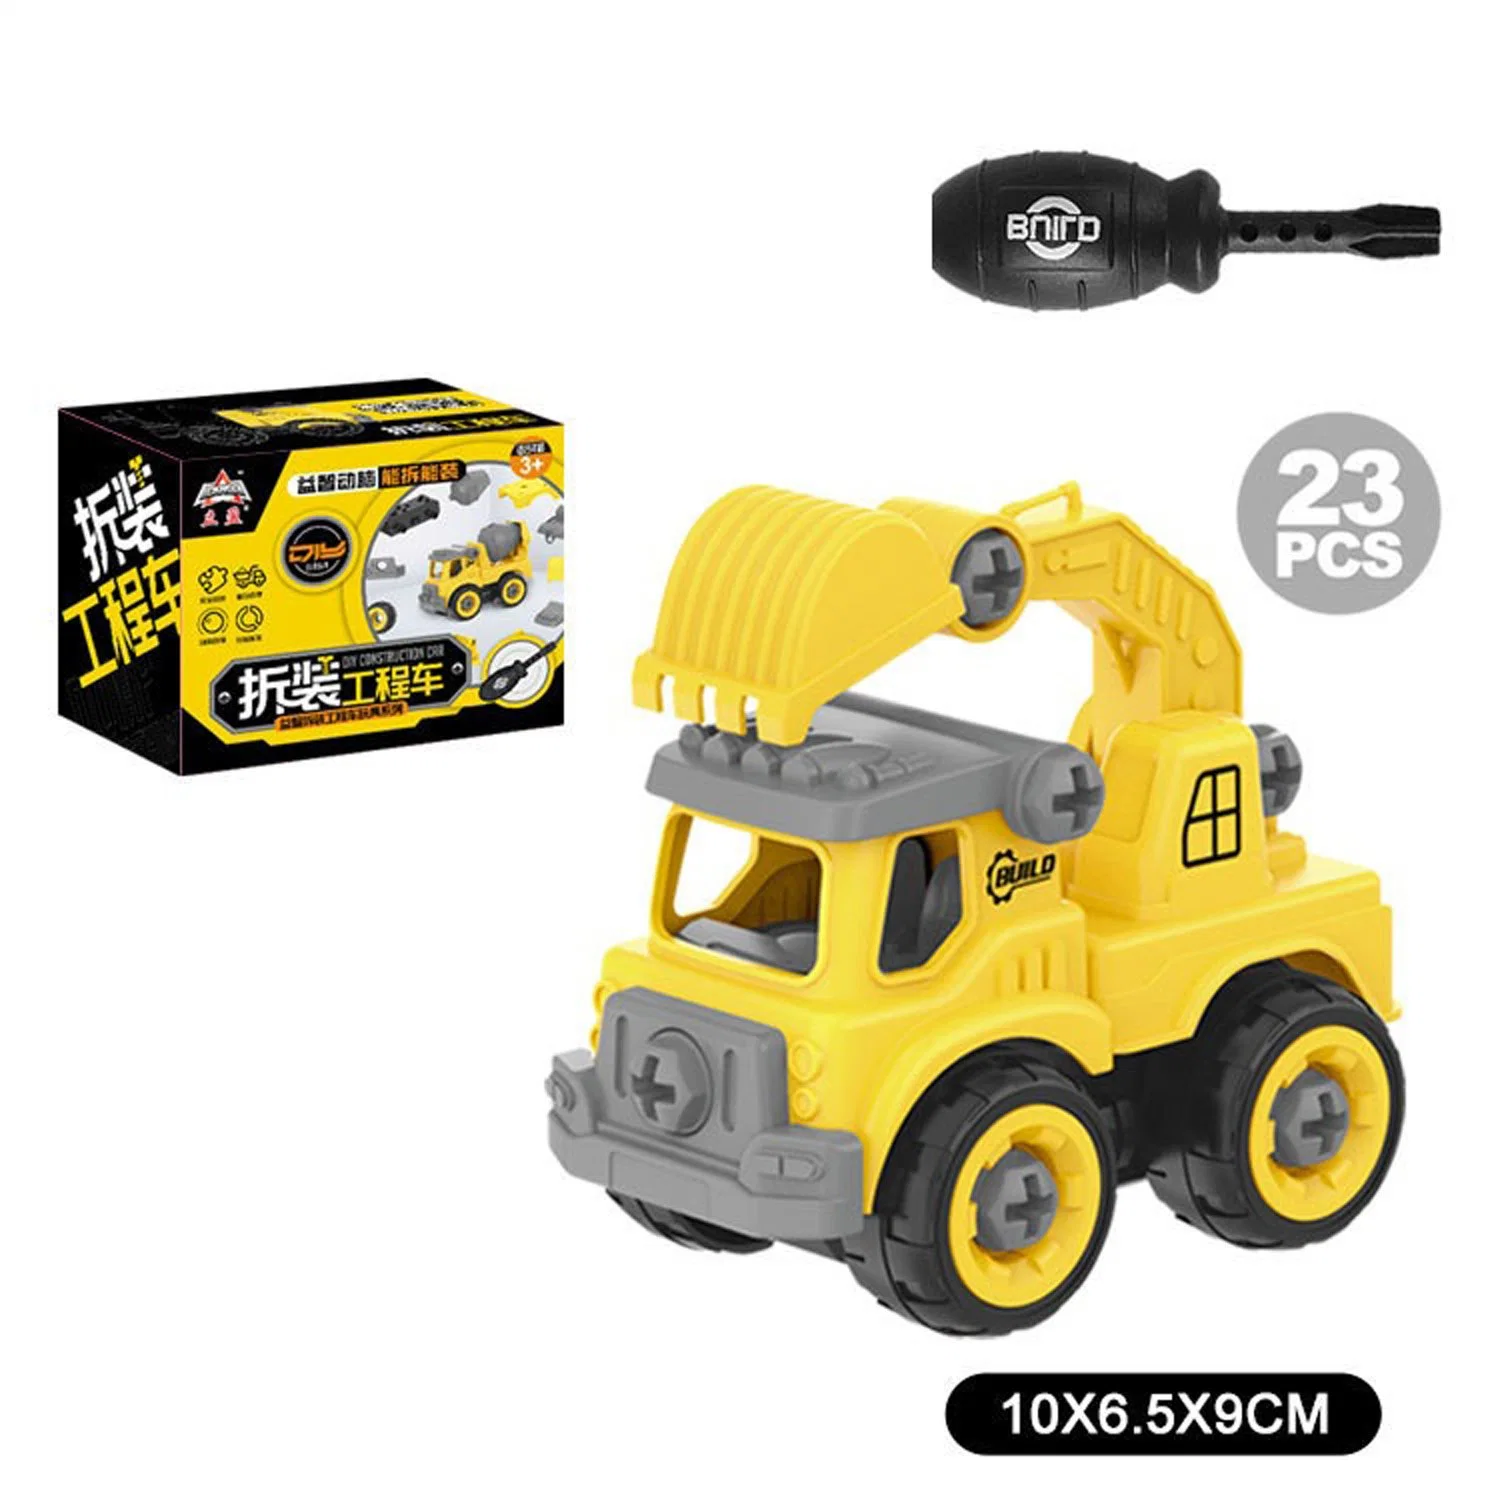 Disassembly and Assembly of Engineering Vehicles Construction Plastic Dump Truck Toy